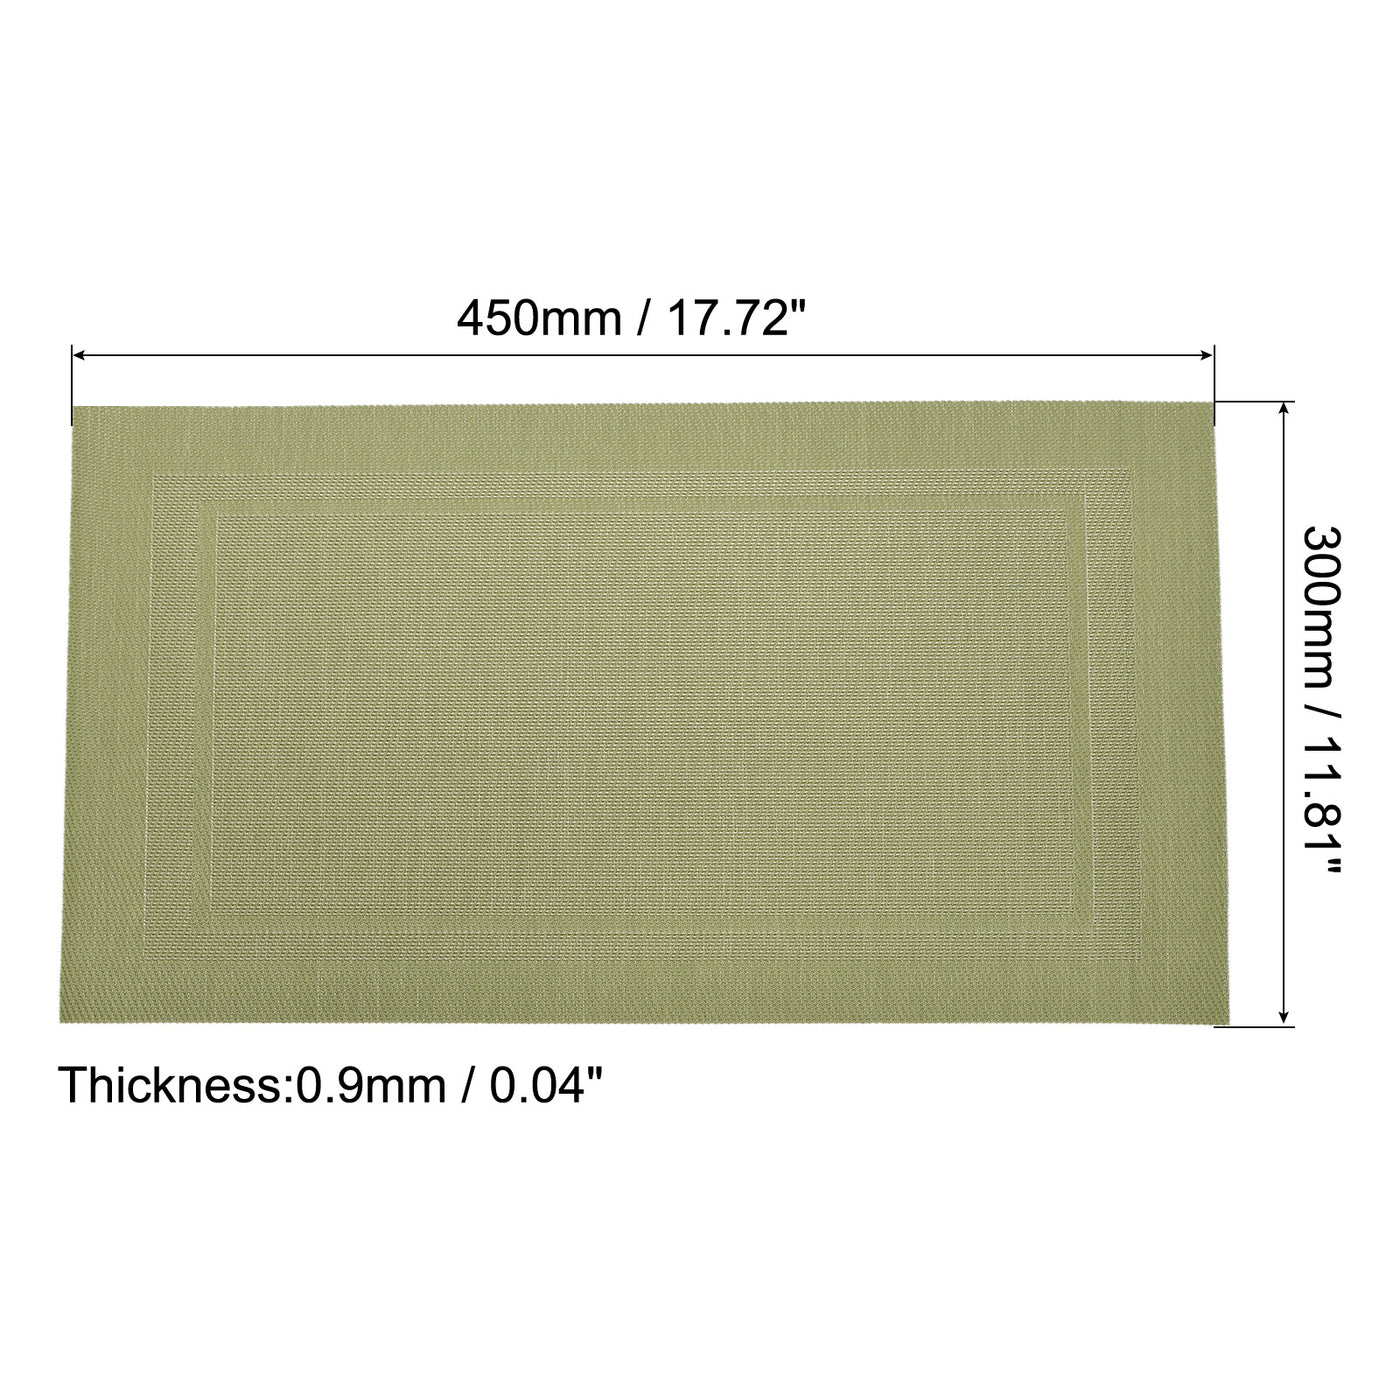 uxcell Uxcell Place Mats 450x300mm 2pcs PVC Table Washable Woven Placemat, Green